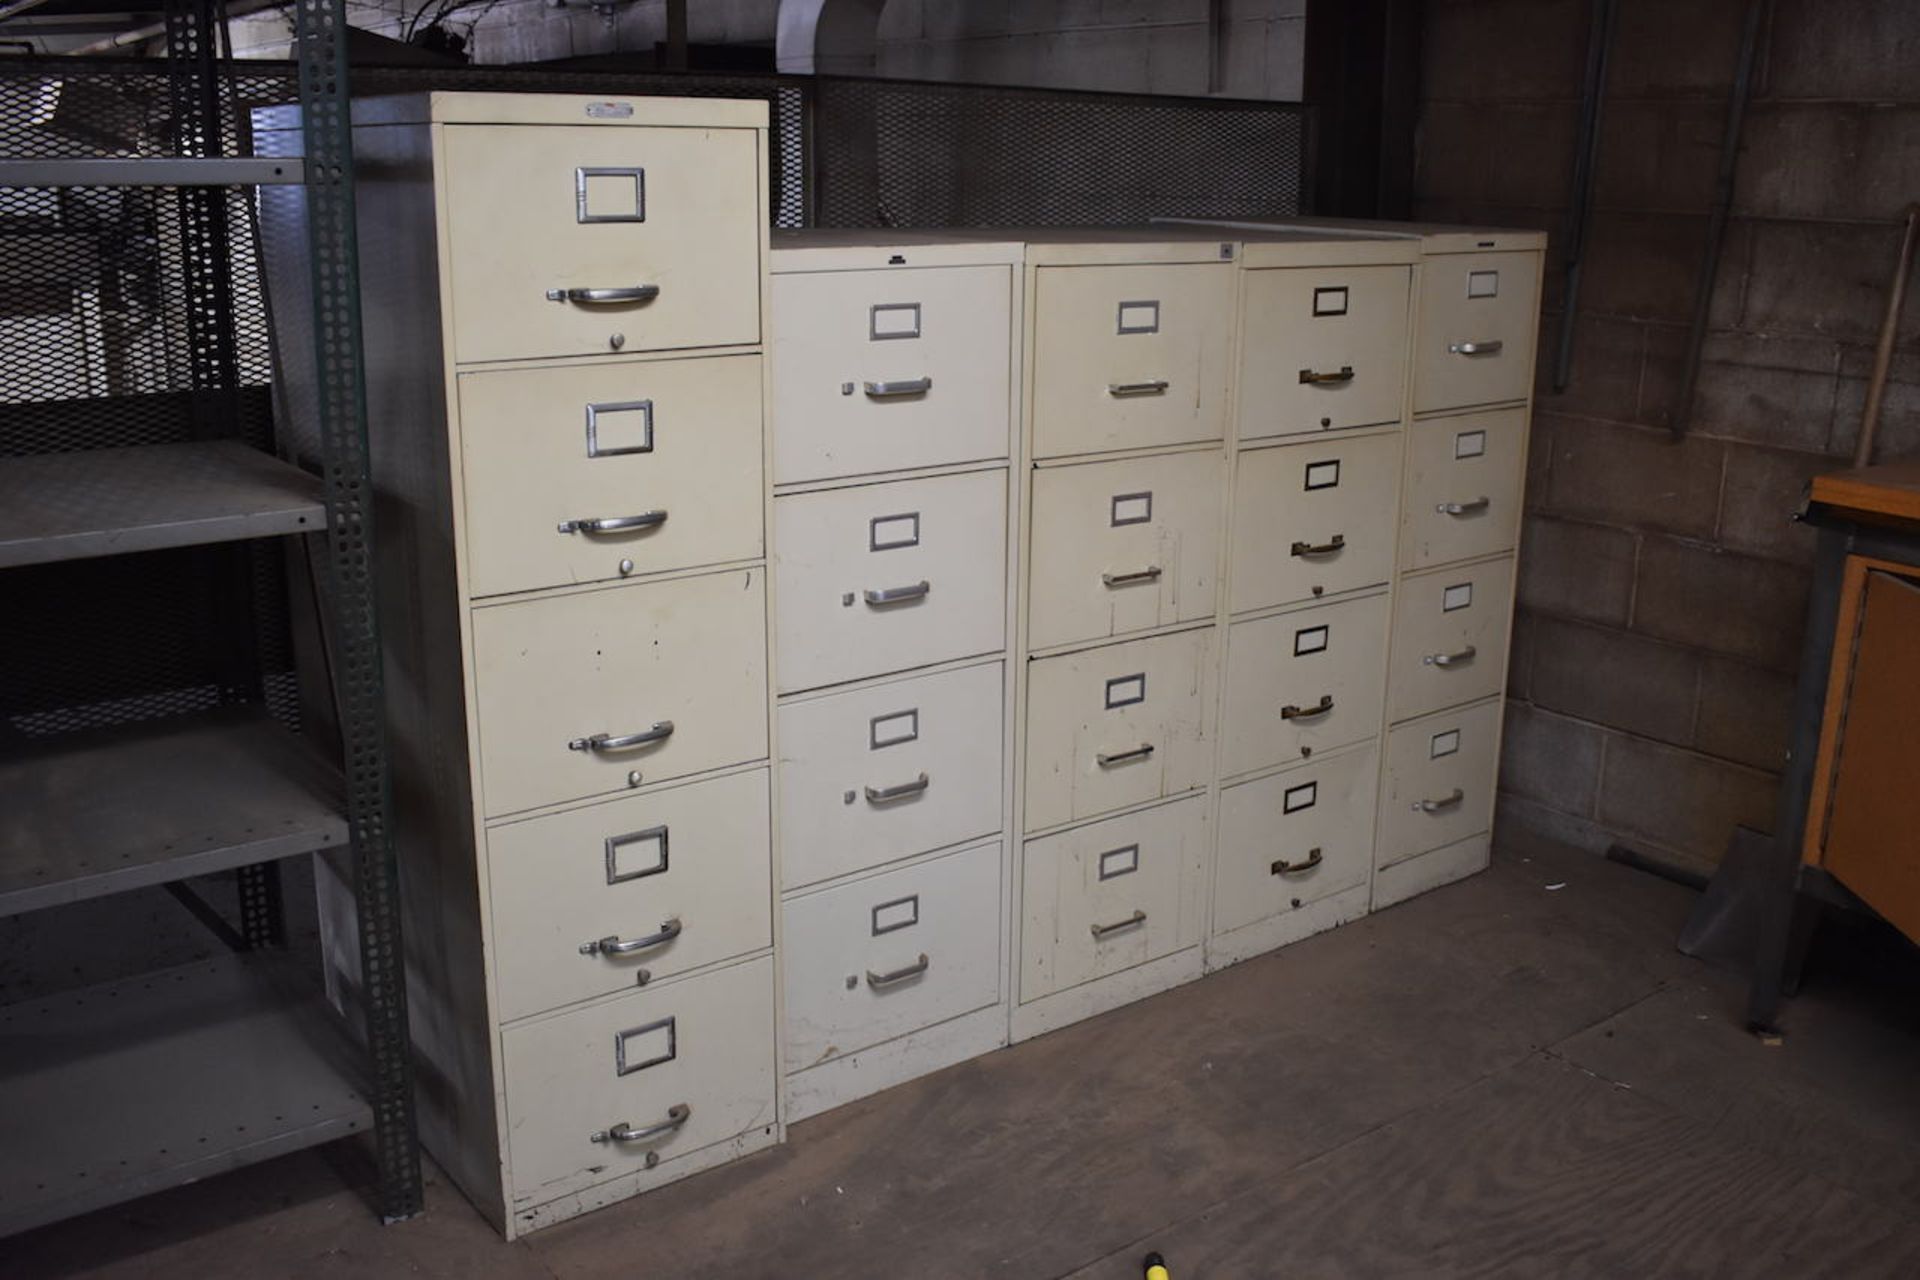 ASSORTED WORK BENCHES, FILE CABINETS, METAL SHELVING AND STORAGE CABINETS IN UPSTAIRS MEZZANINE. (